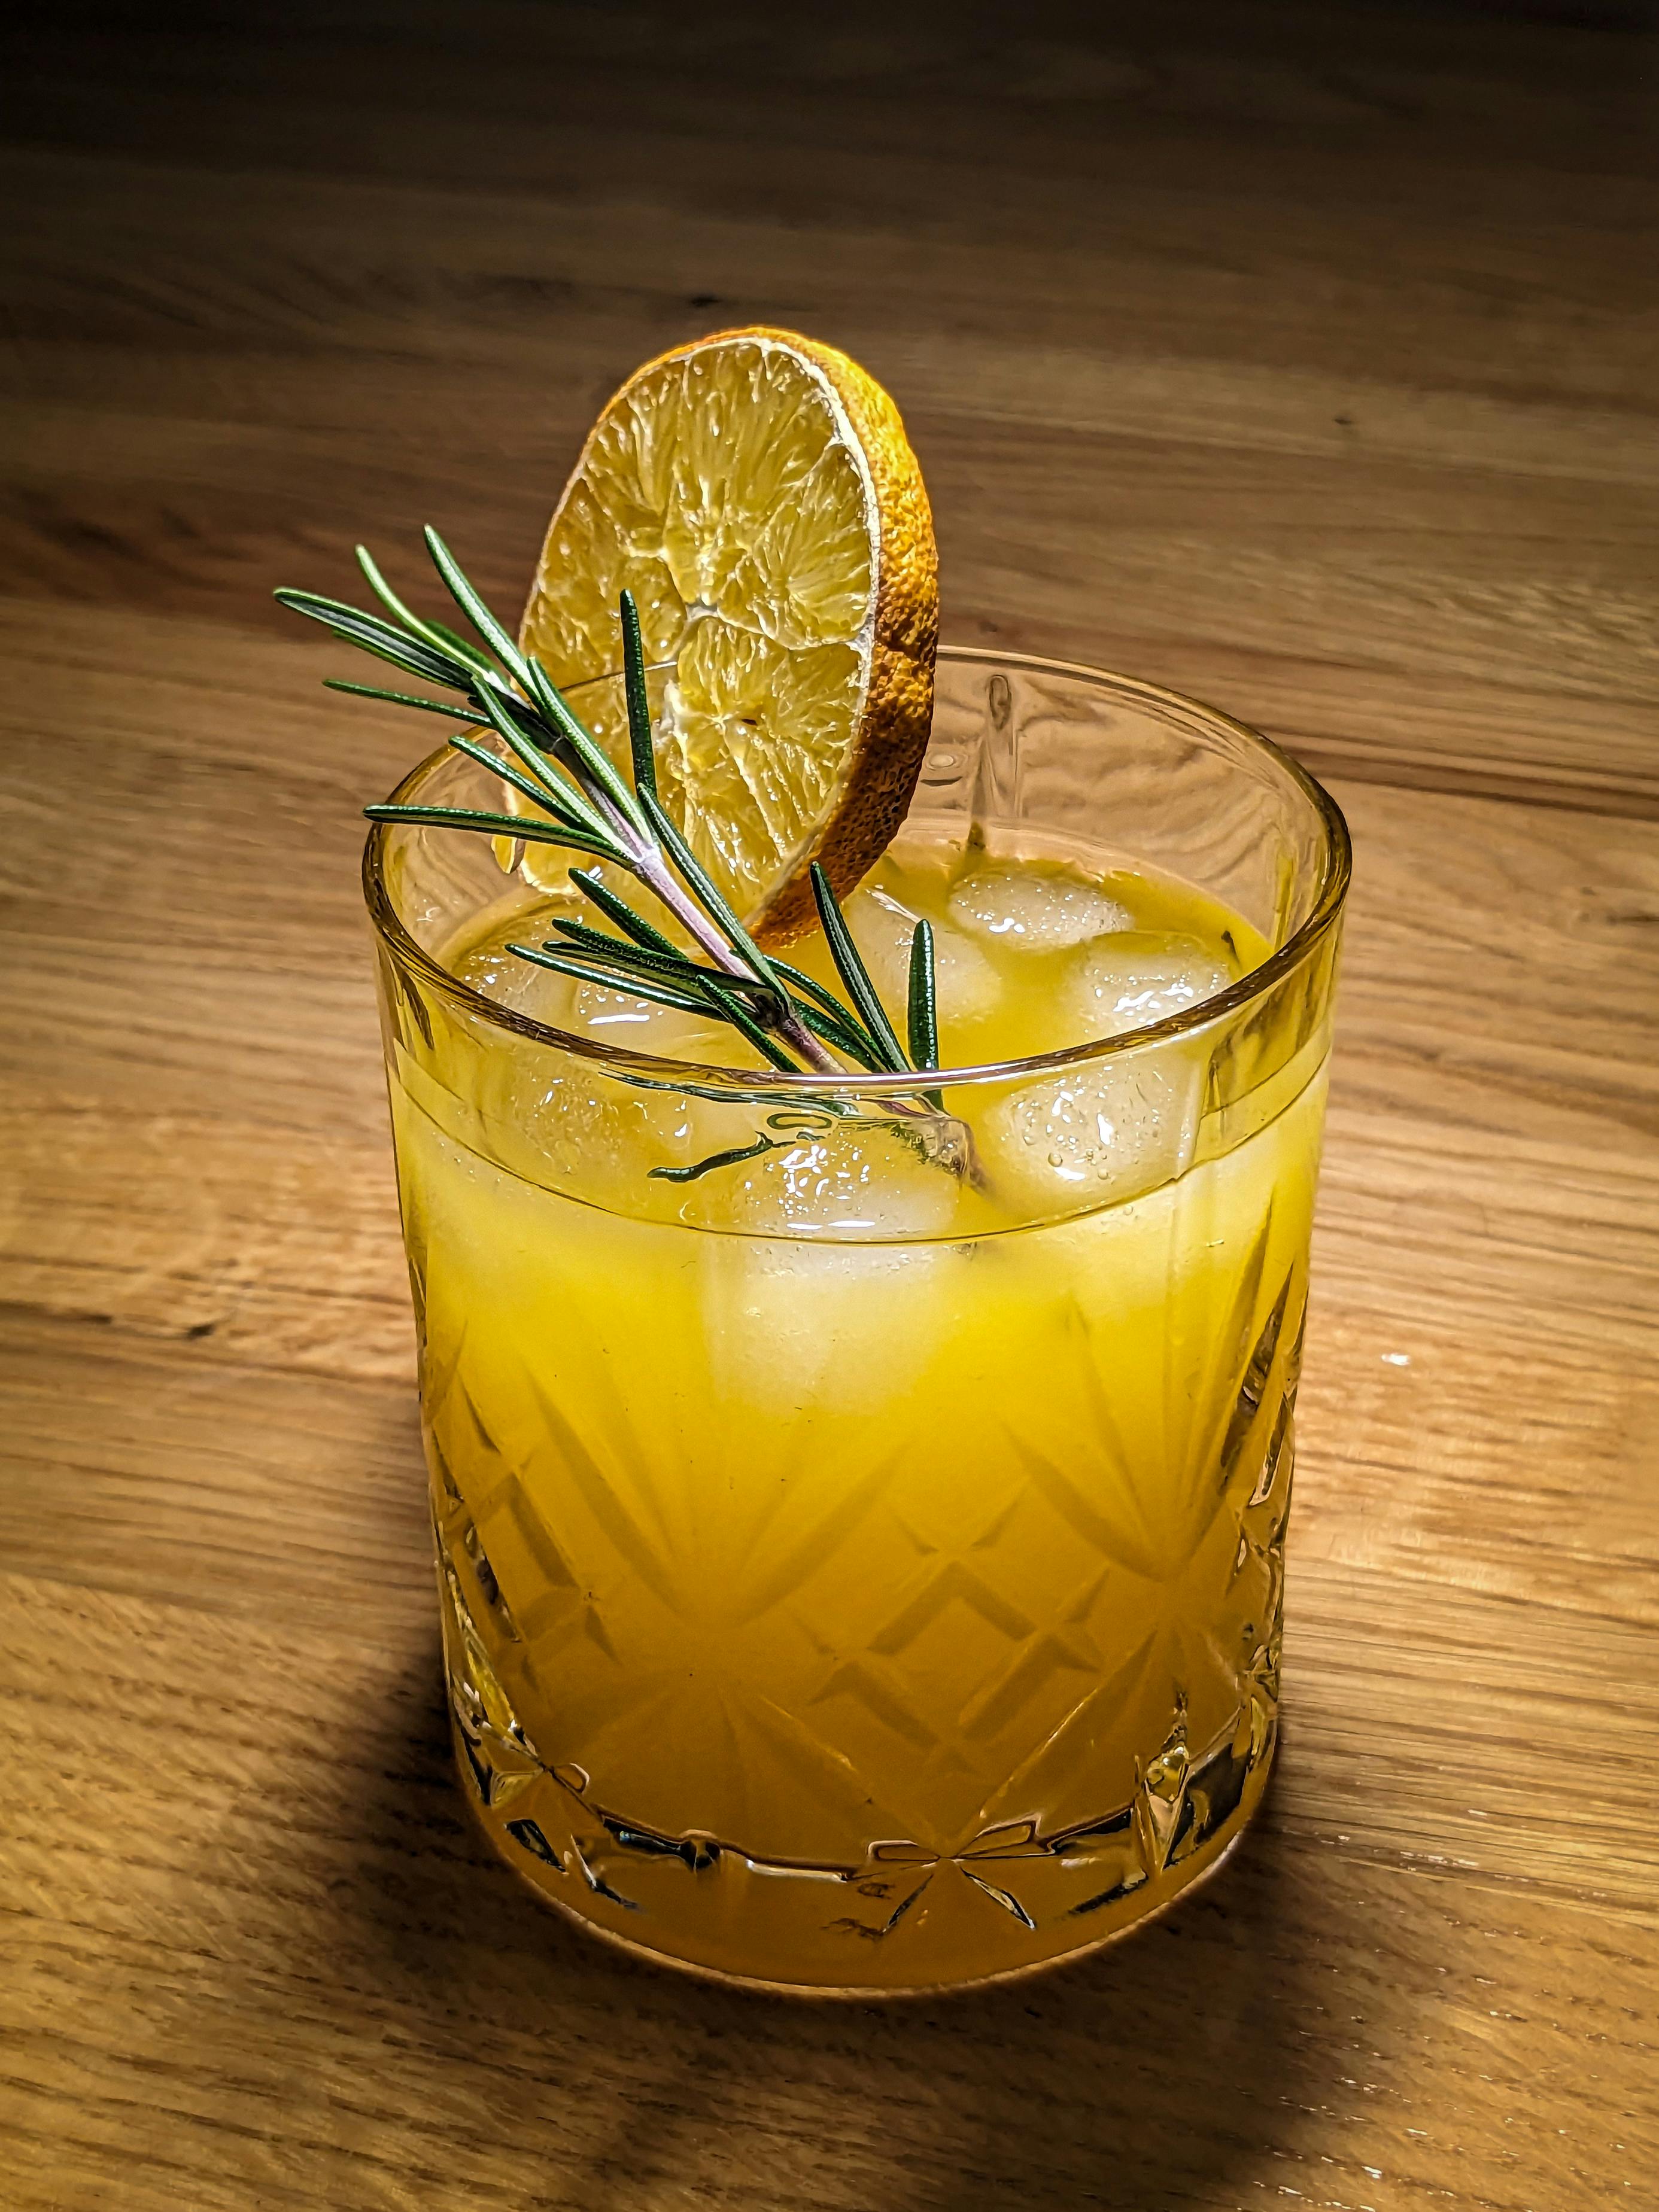 Whisky Sour Drinks To Whisk-Up A Game-Changing Cocktails Storm